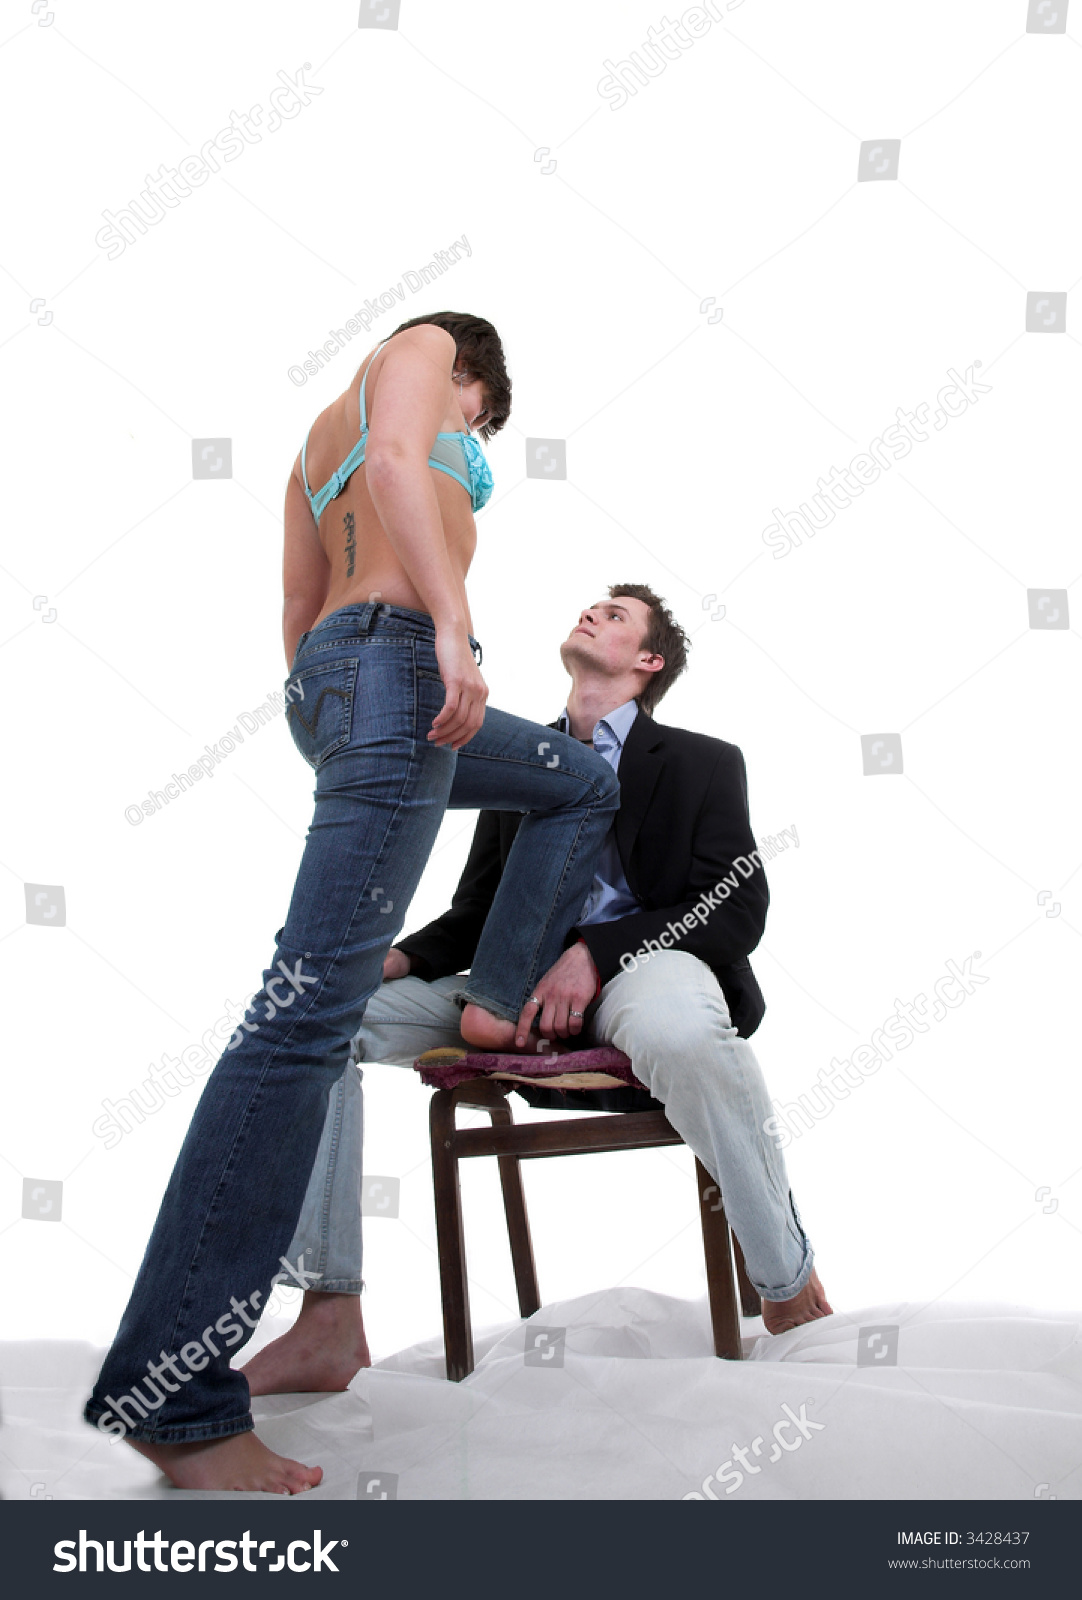 Sitting Man Woman Strips Isolated On